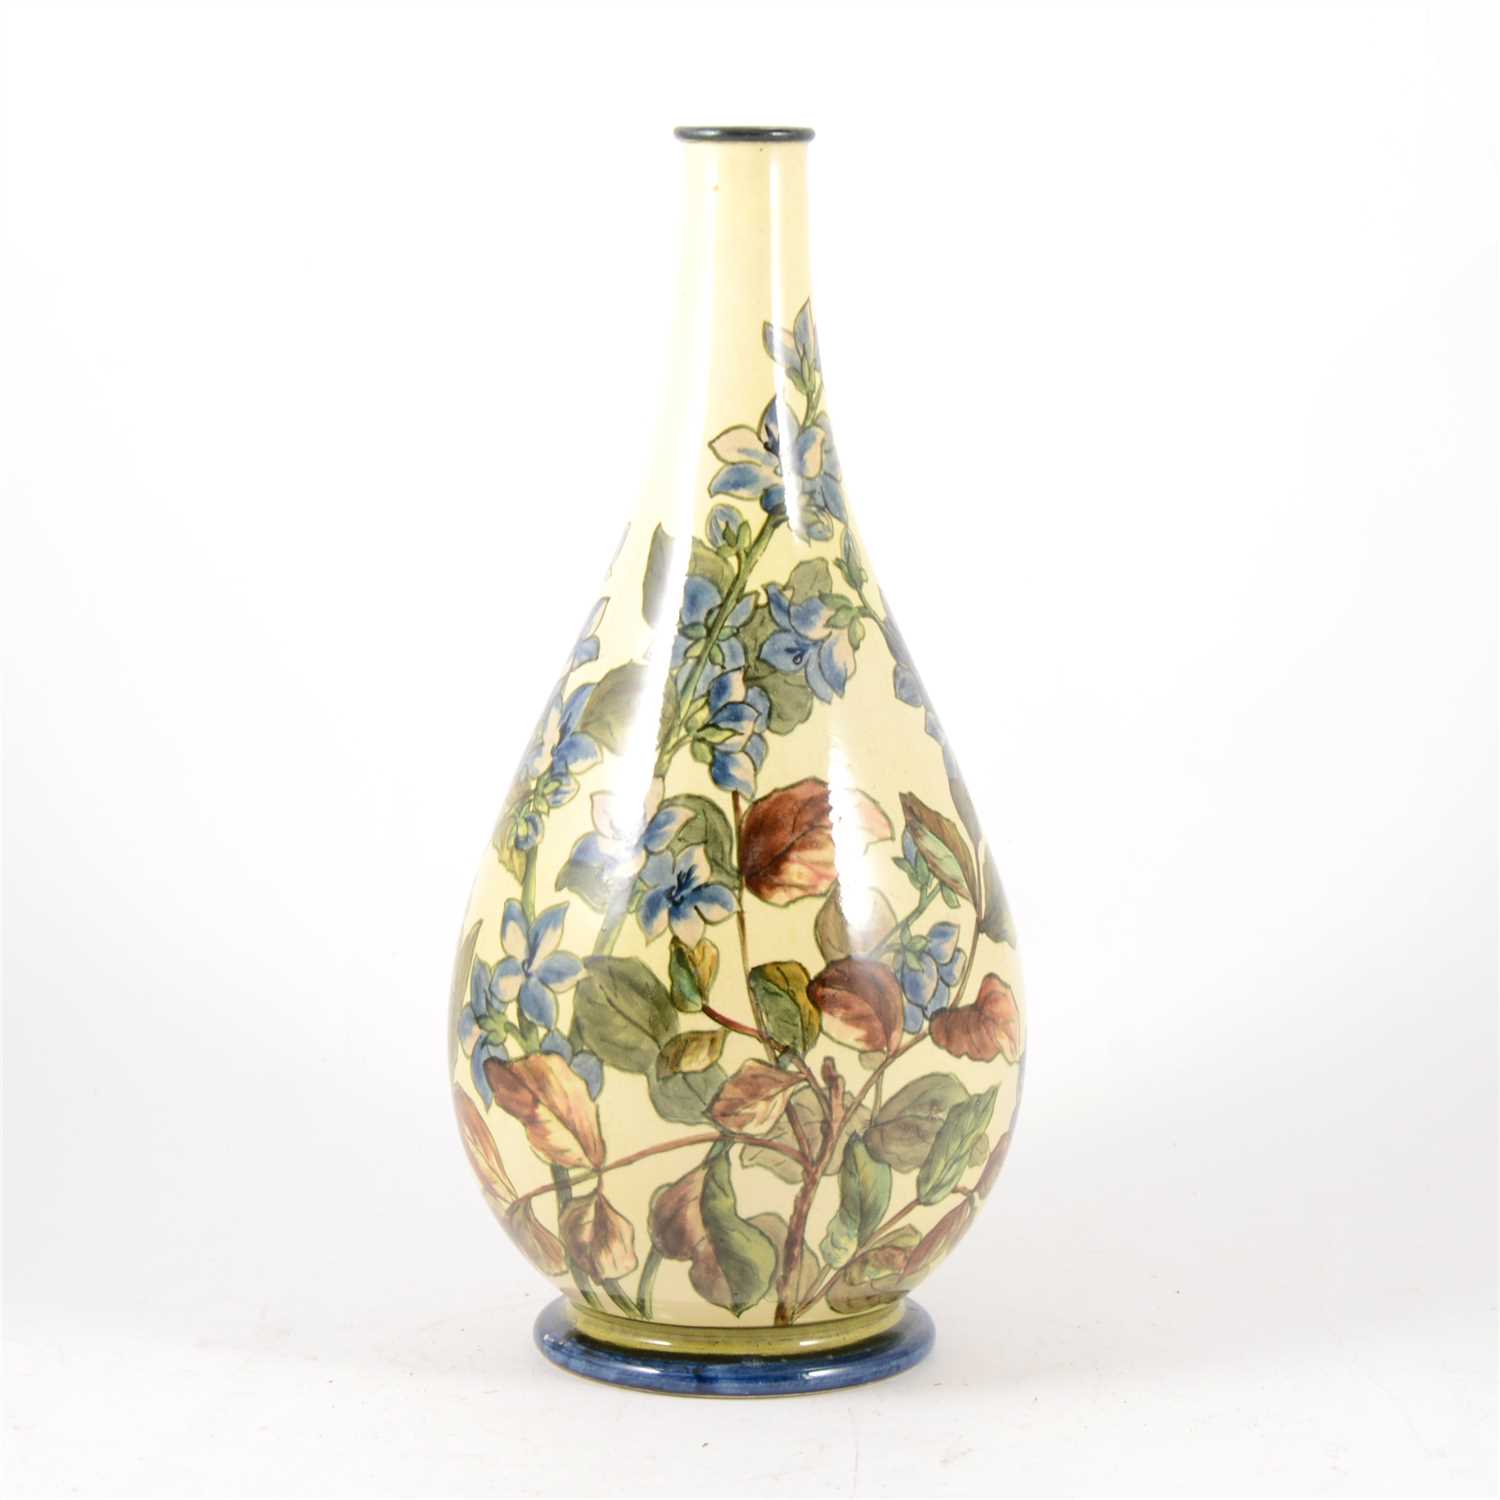 Lot 22 - A Doulton Faïence vase decorated with blue flowers